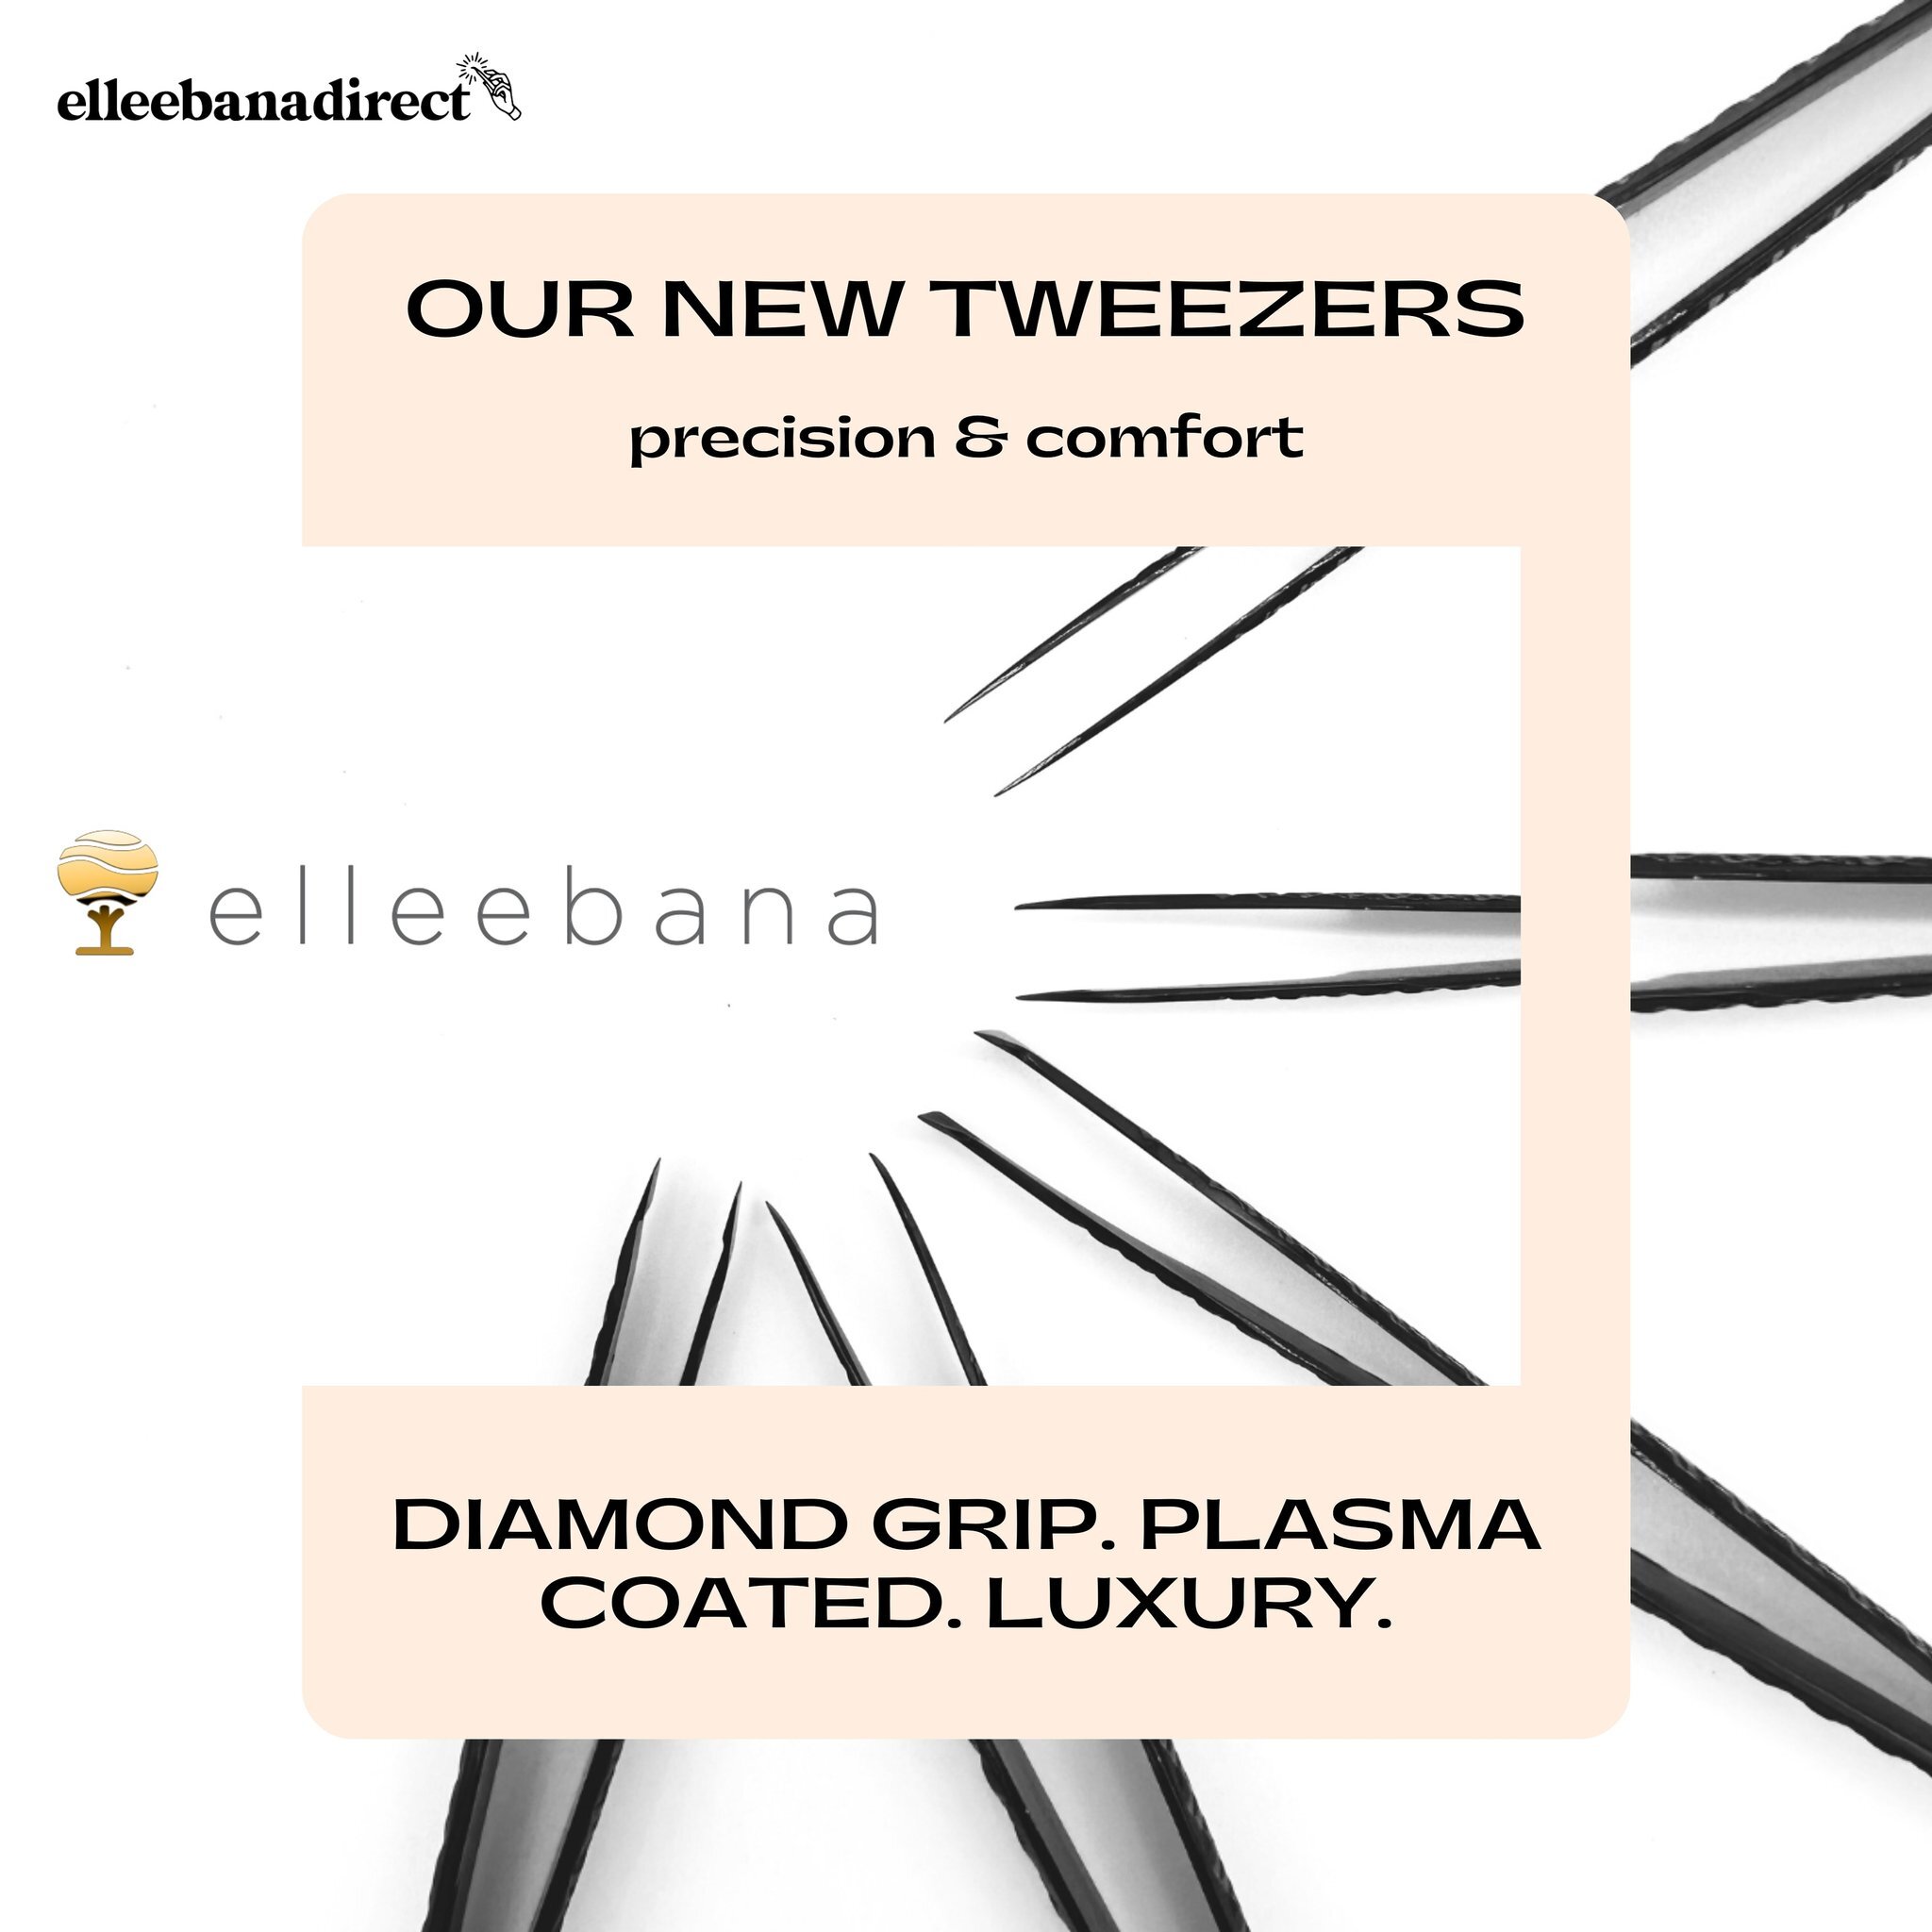 Boasting fiber tips ✨, perfect balance, and ideal tension Elleebana&rsquo;s new tweezers are going to level UP ⬆️ your lash game. Head over to Elleebana Direct and check out all the new designs.